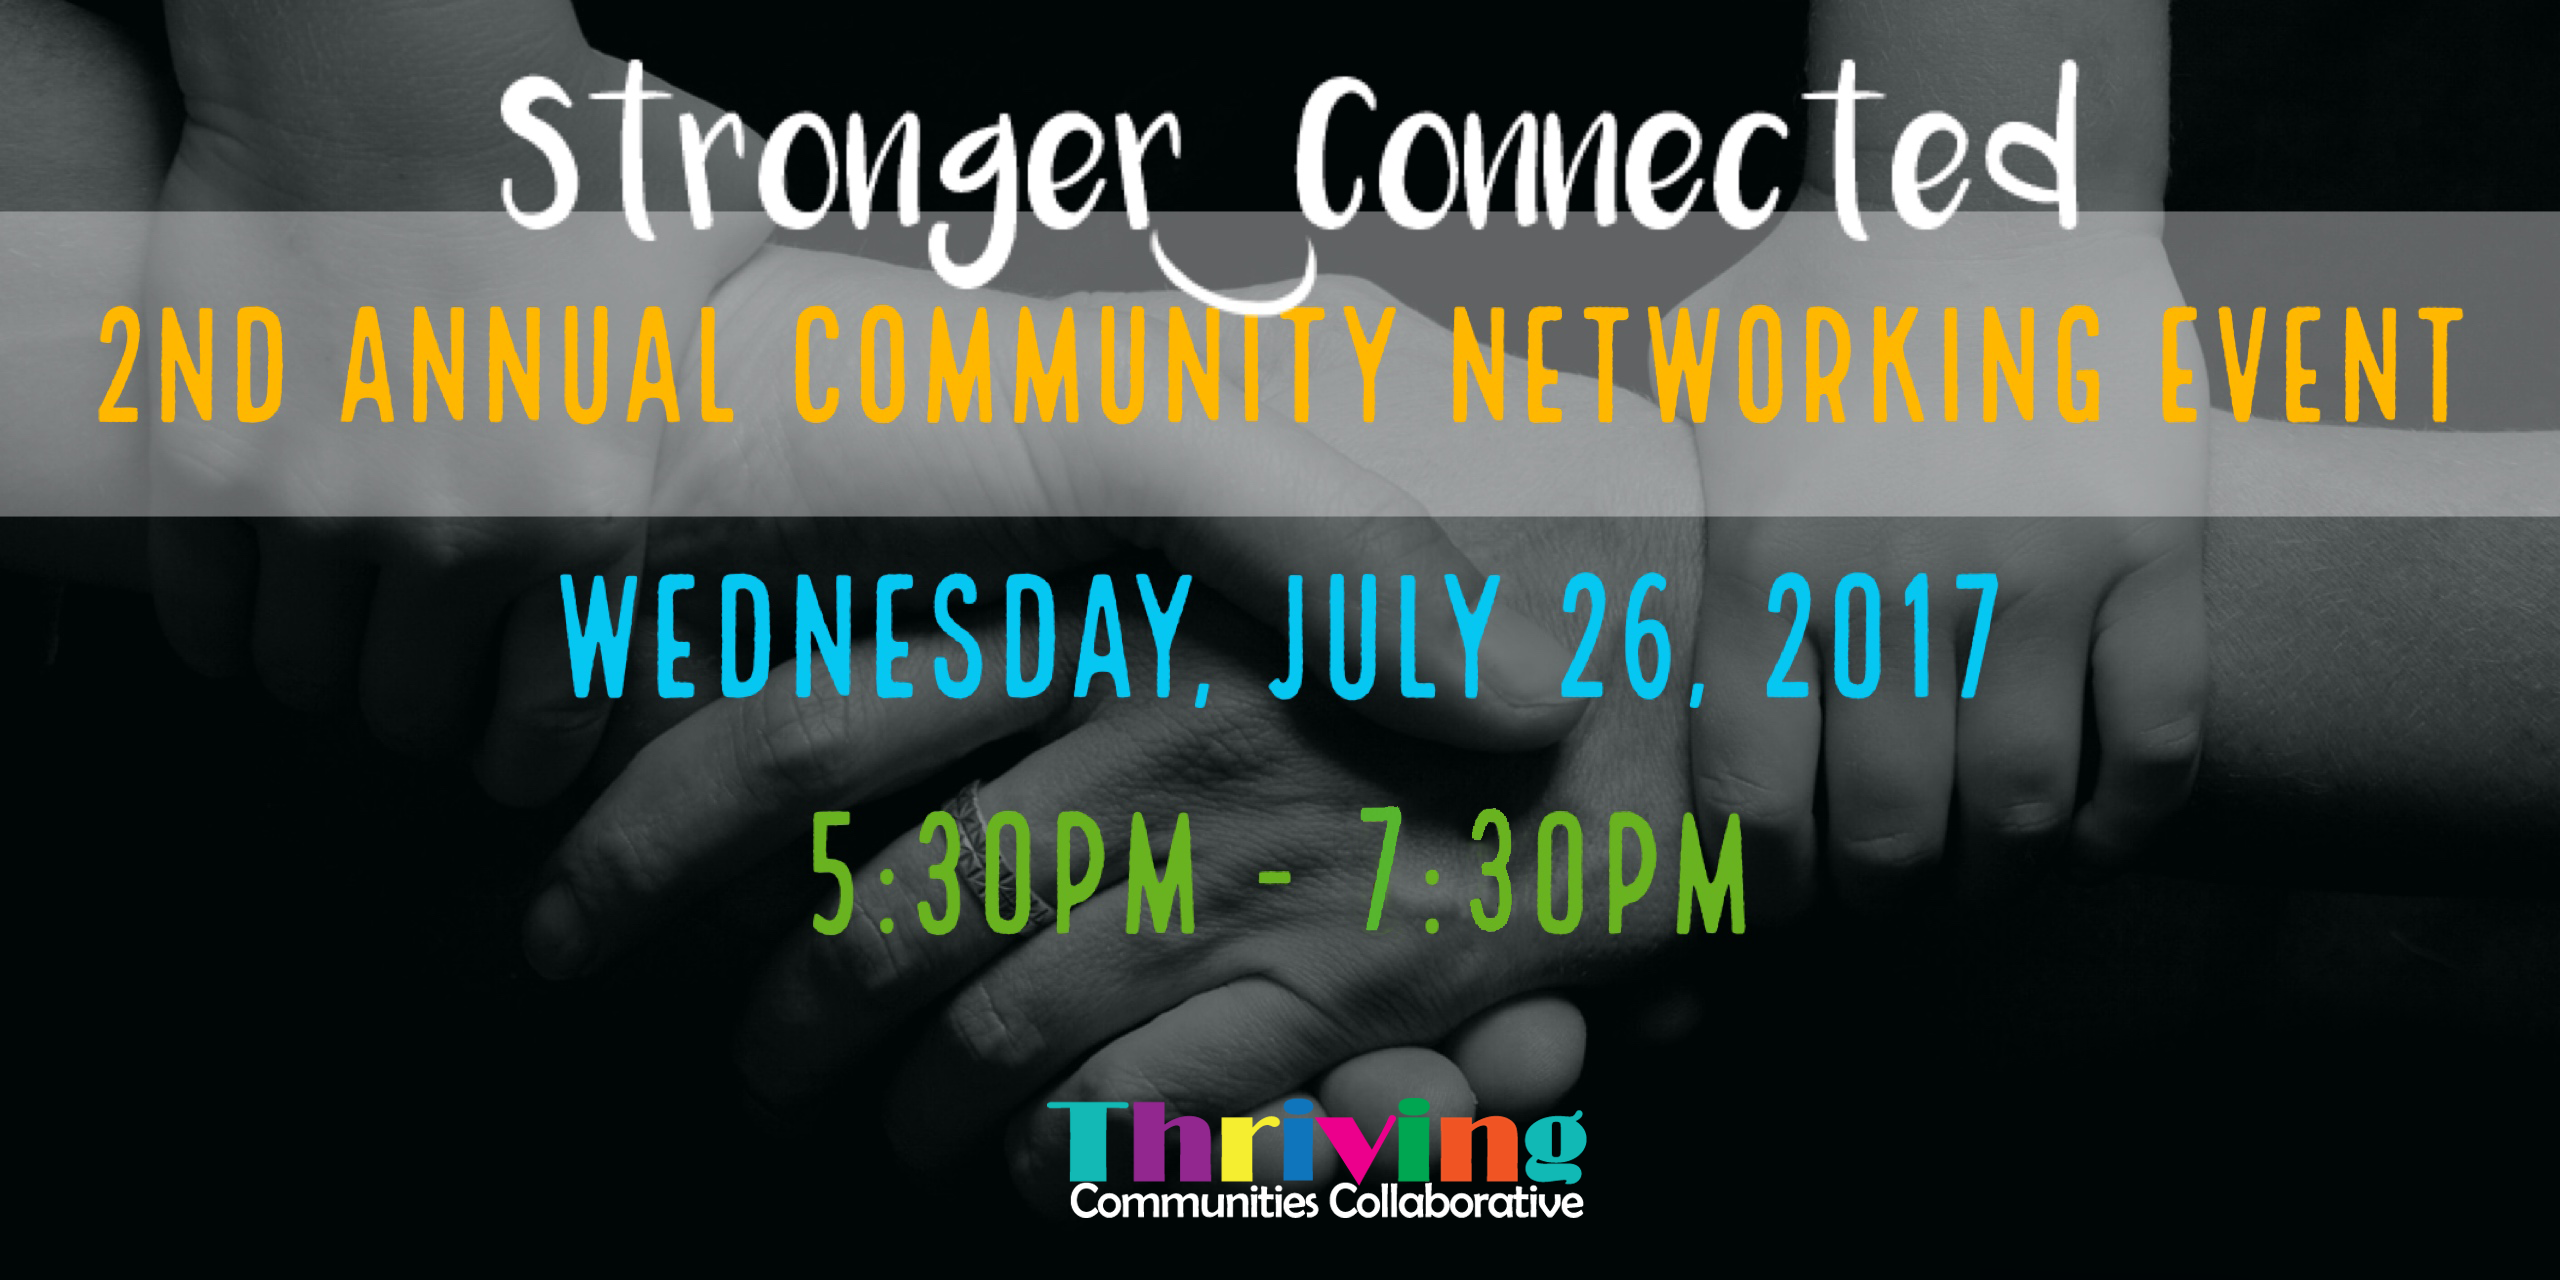 Stronger Connected - 2nd Annual Community Networking Event